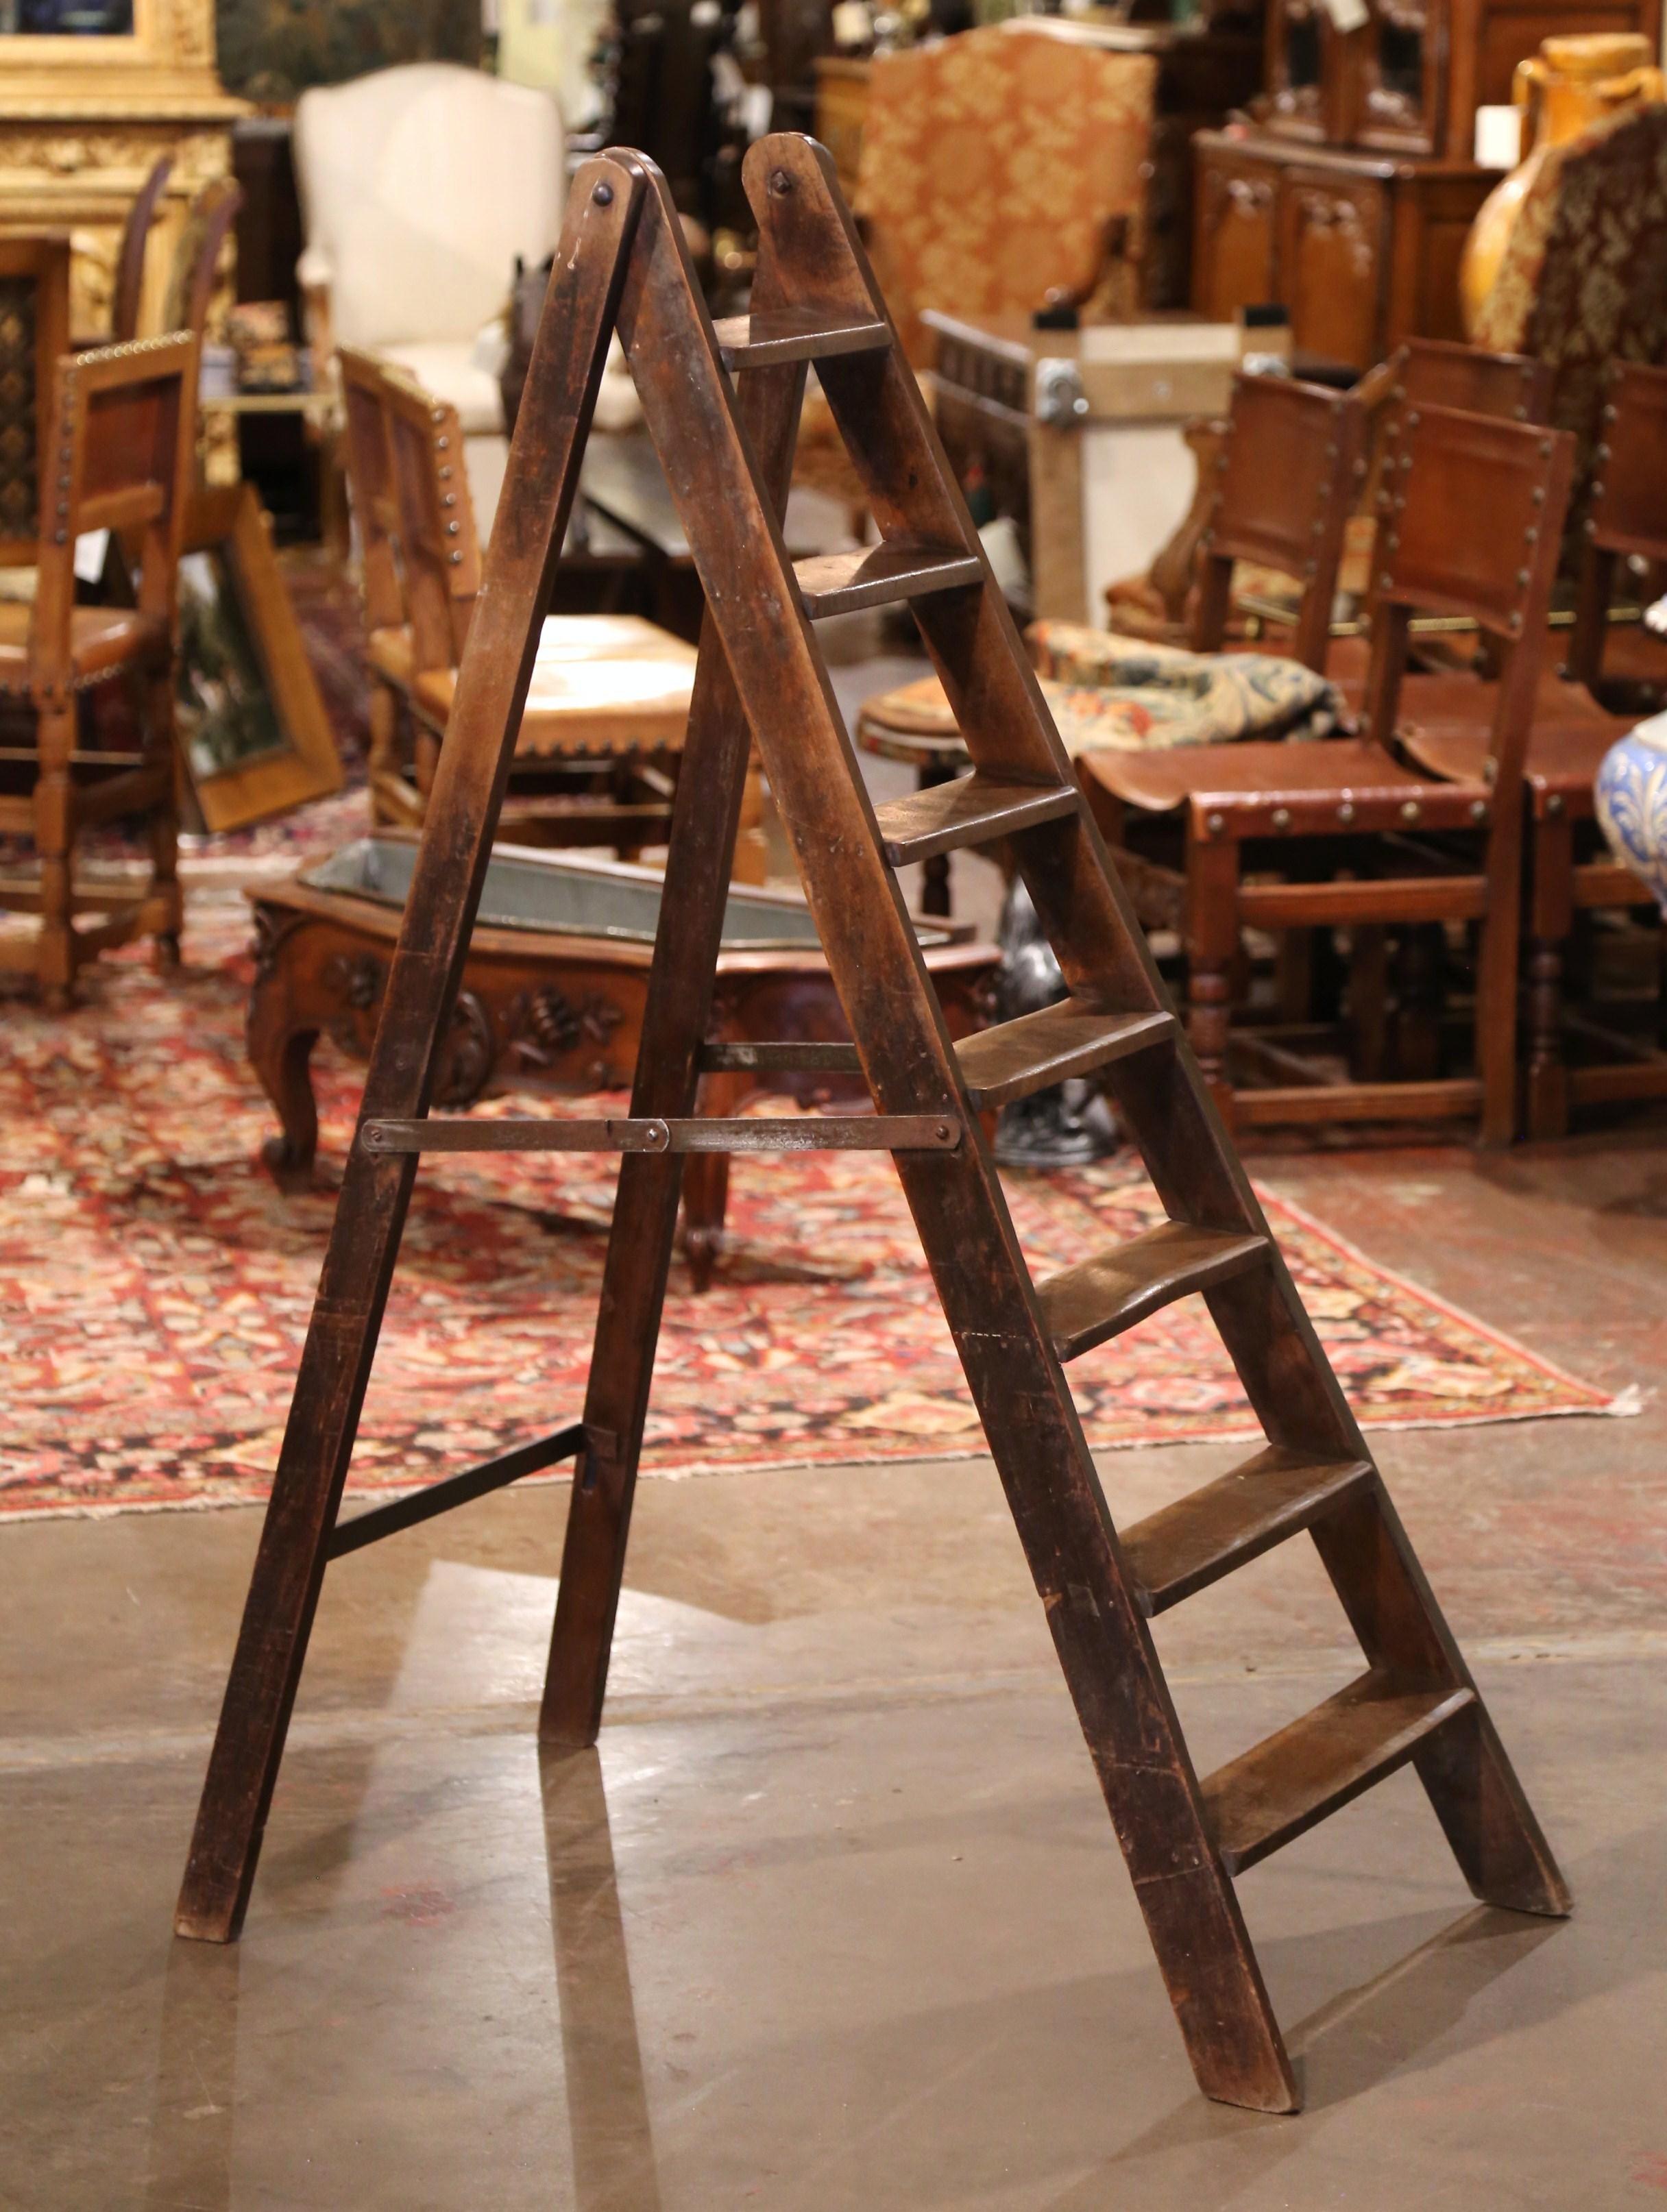 This elegant antique library ladder was created in Normandy France, circa 1920. Made of walnut, the sturdy step ladder features seven steps; it also includes a stabilizing iron beam opposite of the steps as well as two metal locking joints on both